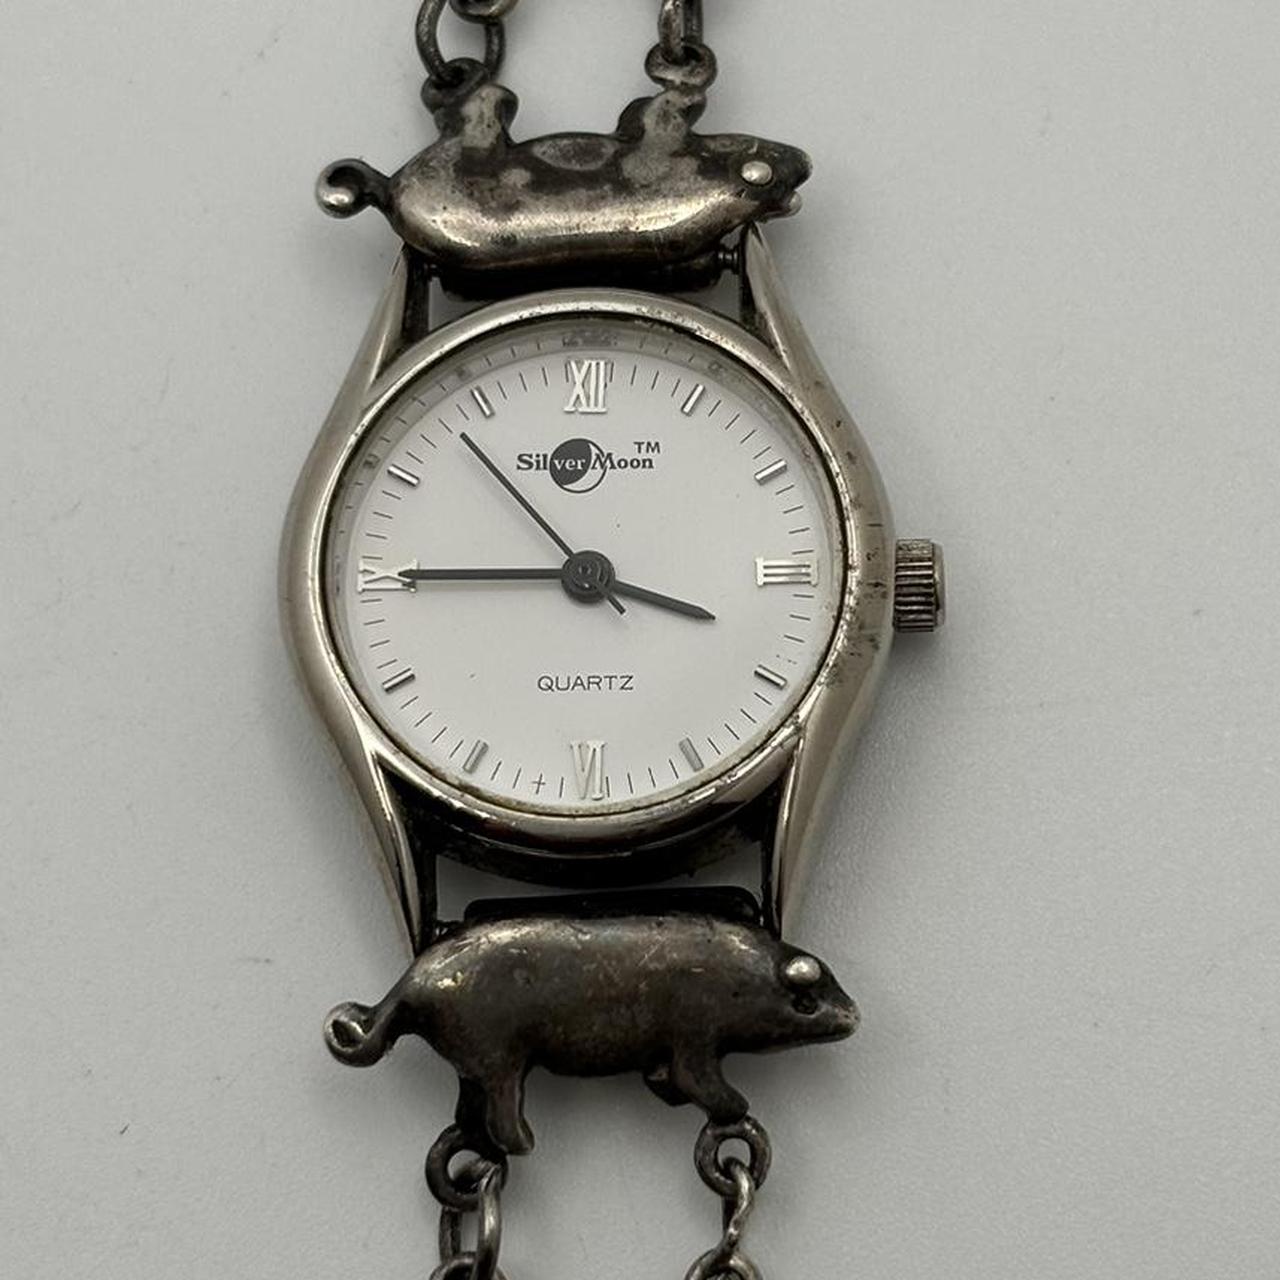 Buy Vintage Solid Sterling Silver Quartz Wrist Watch Online in India - Etsy